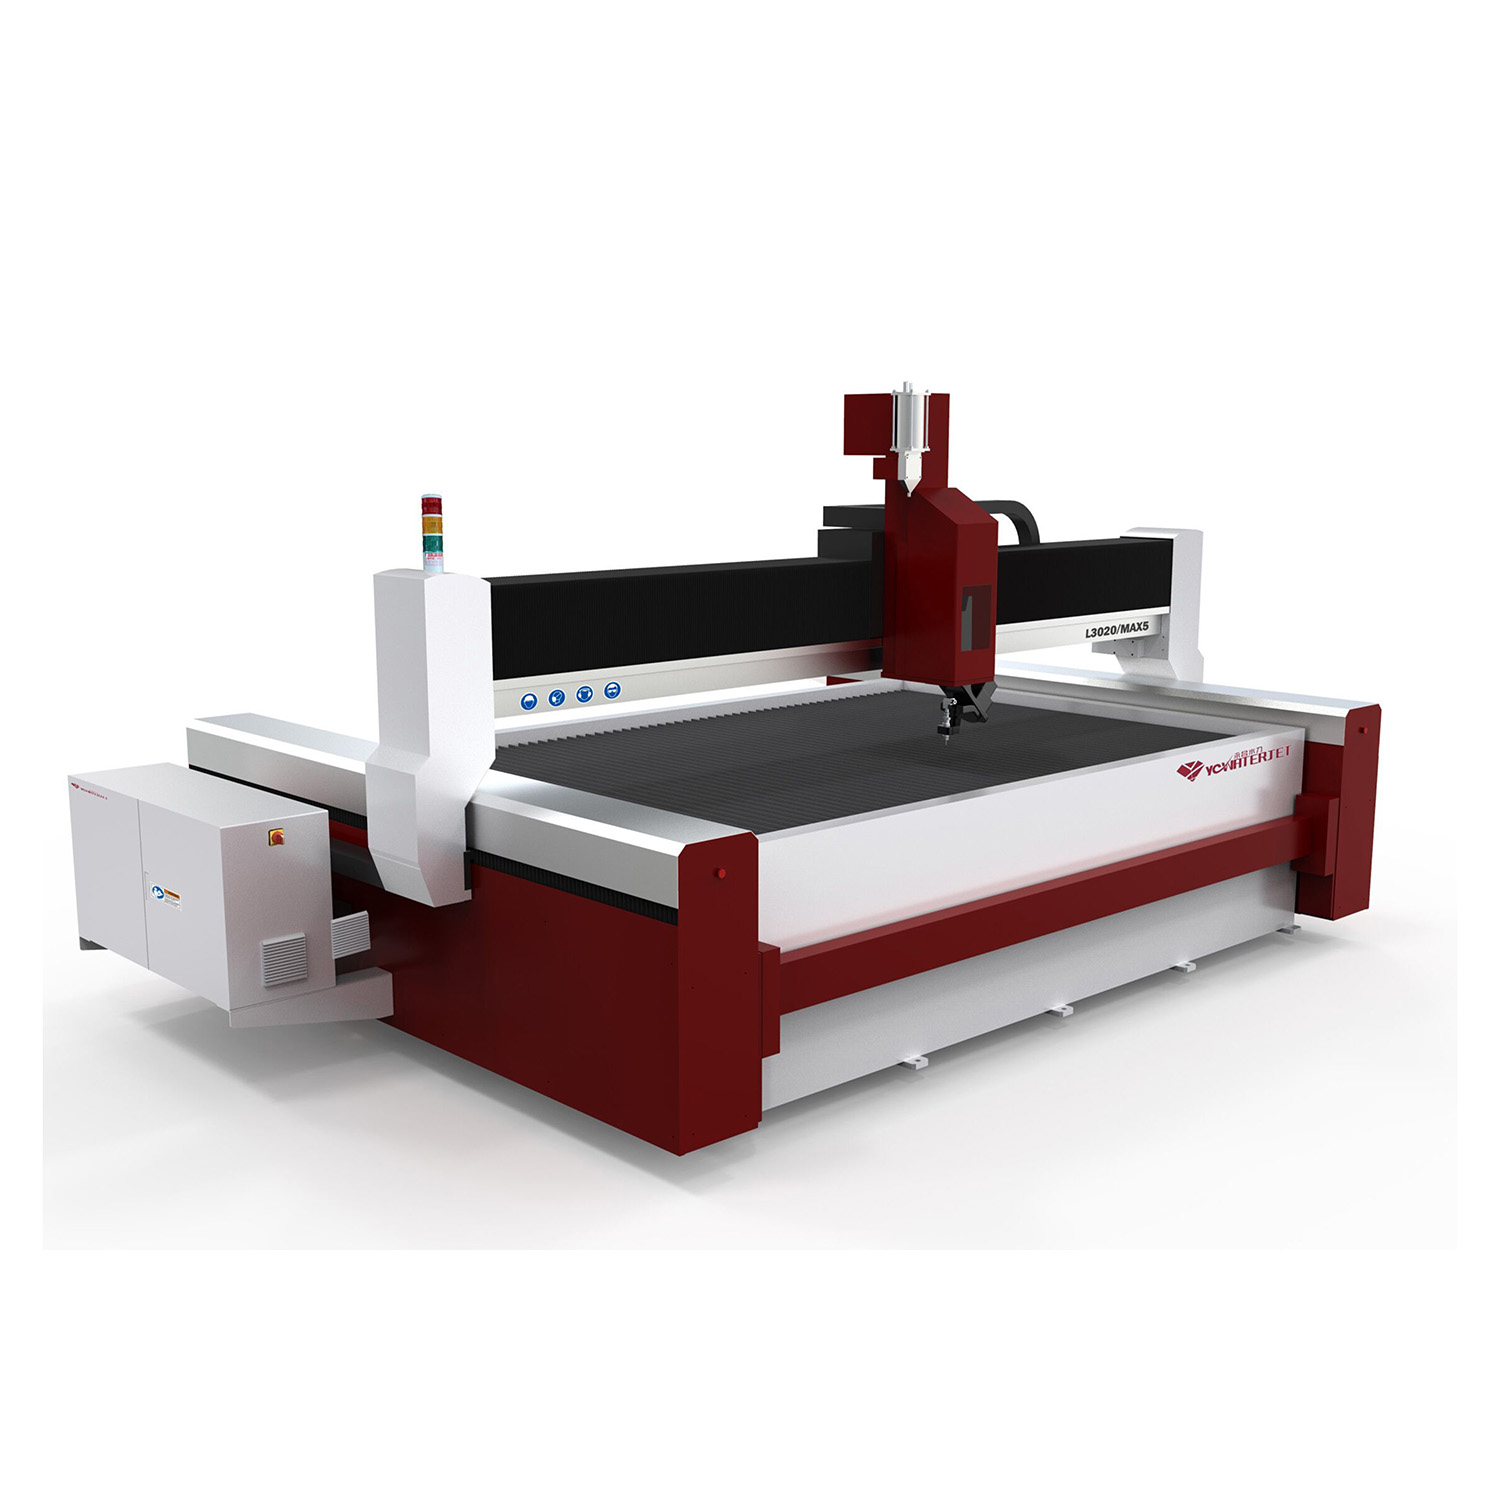 The Composition of Water Jet Cutting Machine And The Factors Affecting Work Efficiency